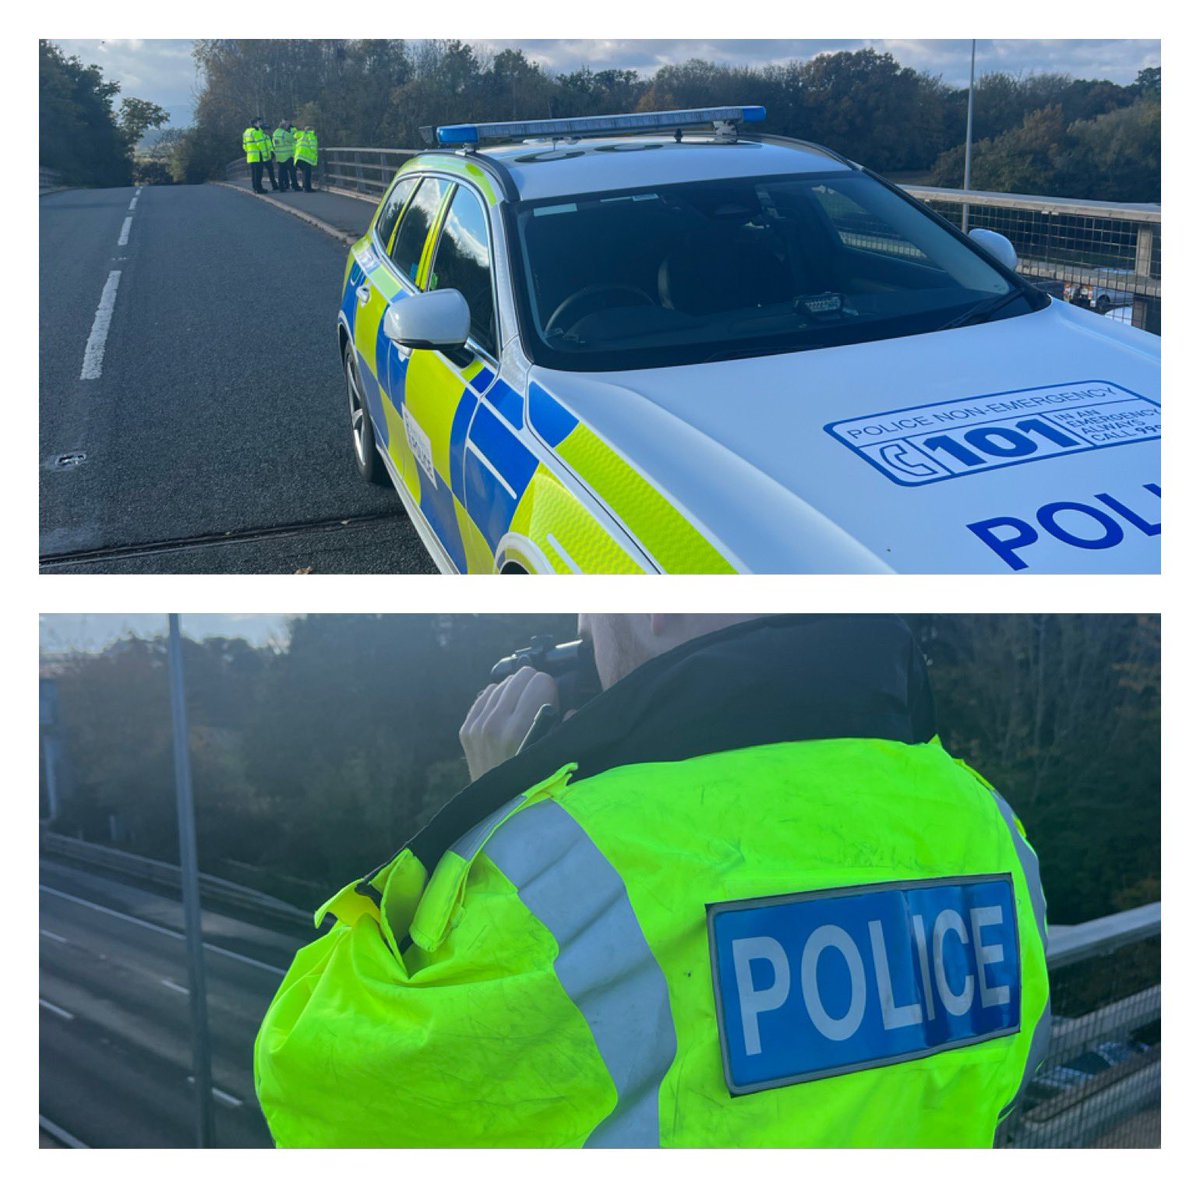 New Roads policing officers with help from @OPUWorcs @OPUHereford practicing their speed camera training nr J7 of the M5 to try and reduce #fatal4 OR95 @WestMerciaPCC @WMerciaRoads